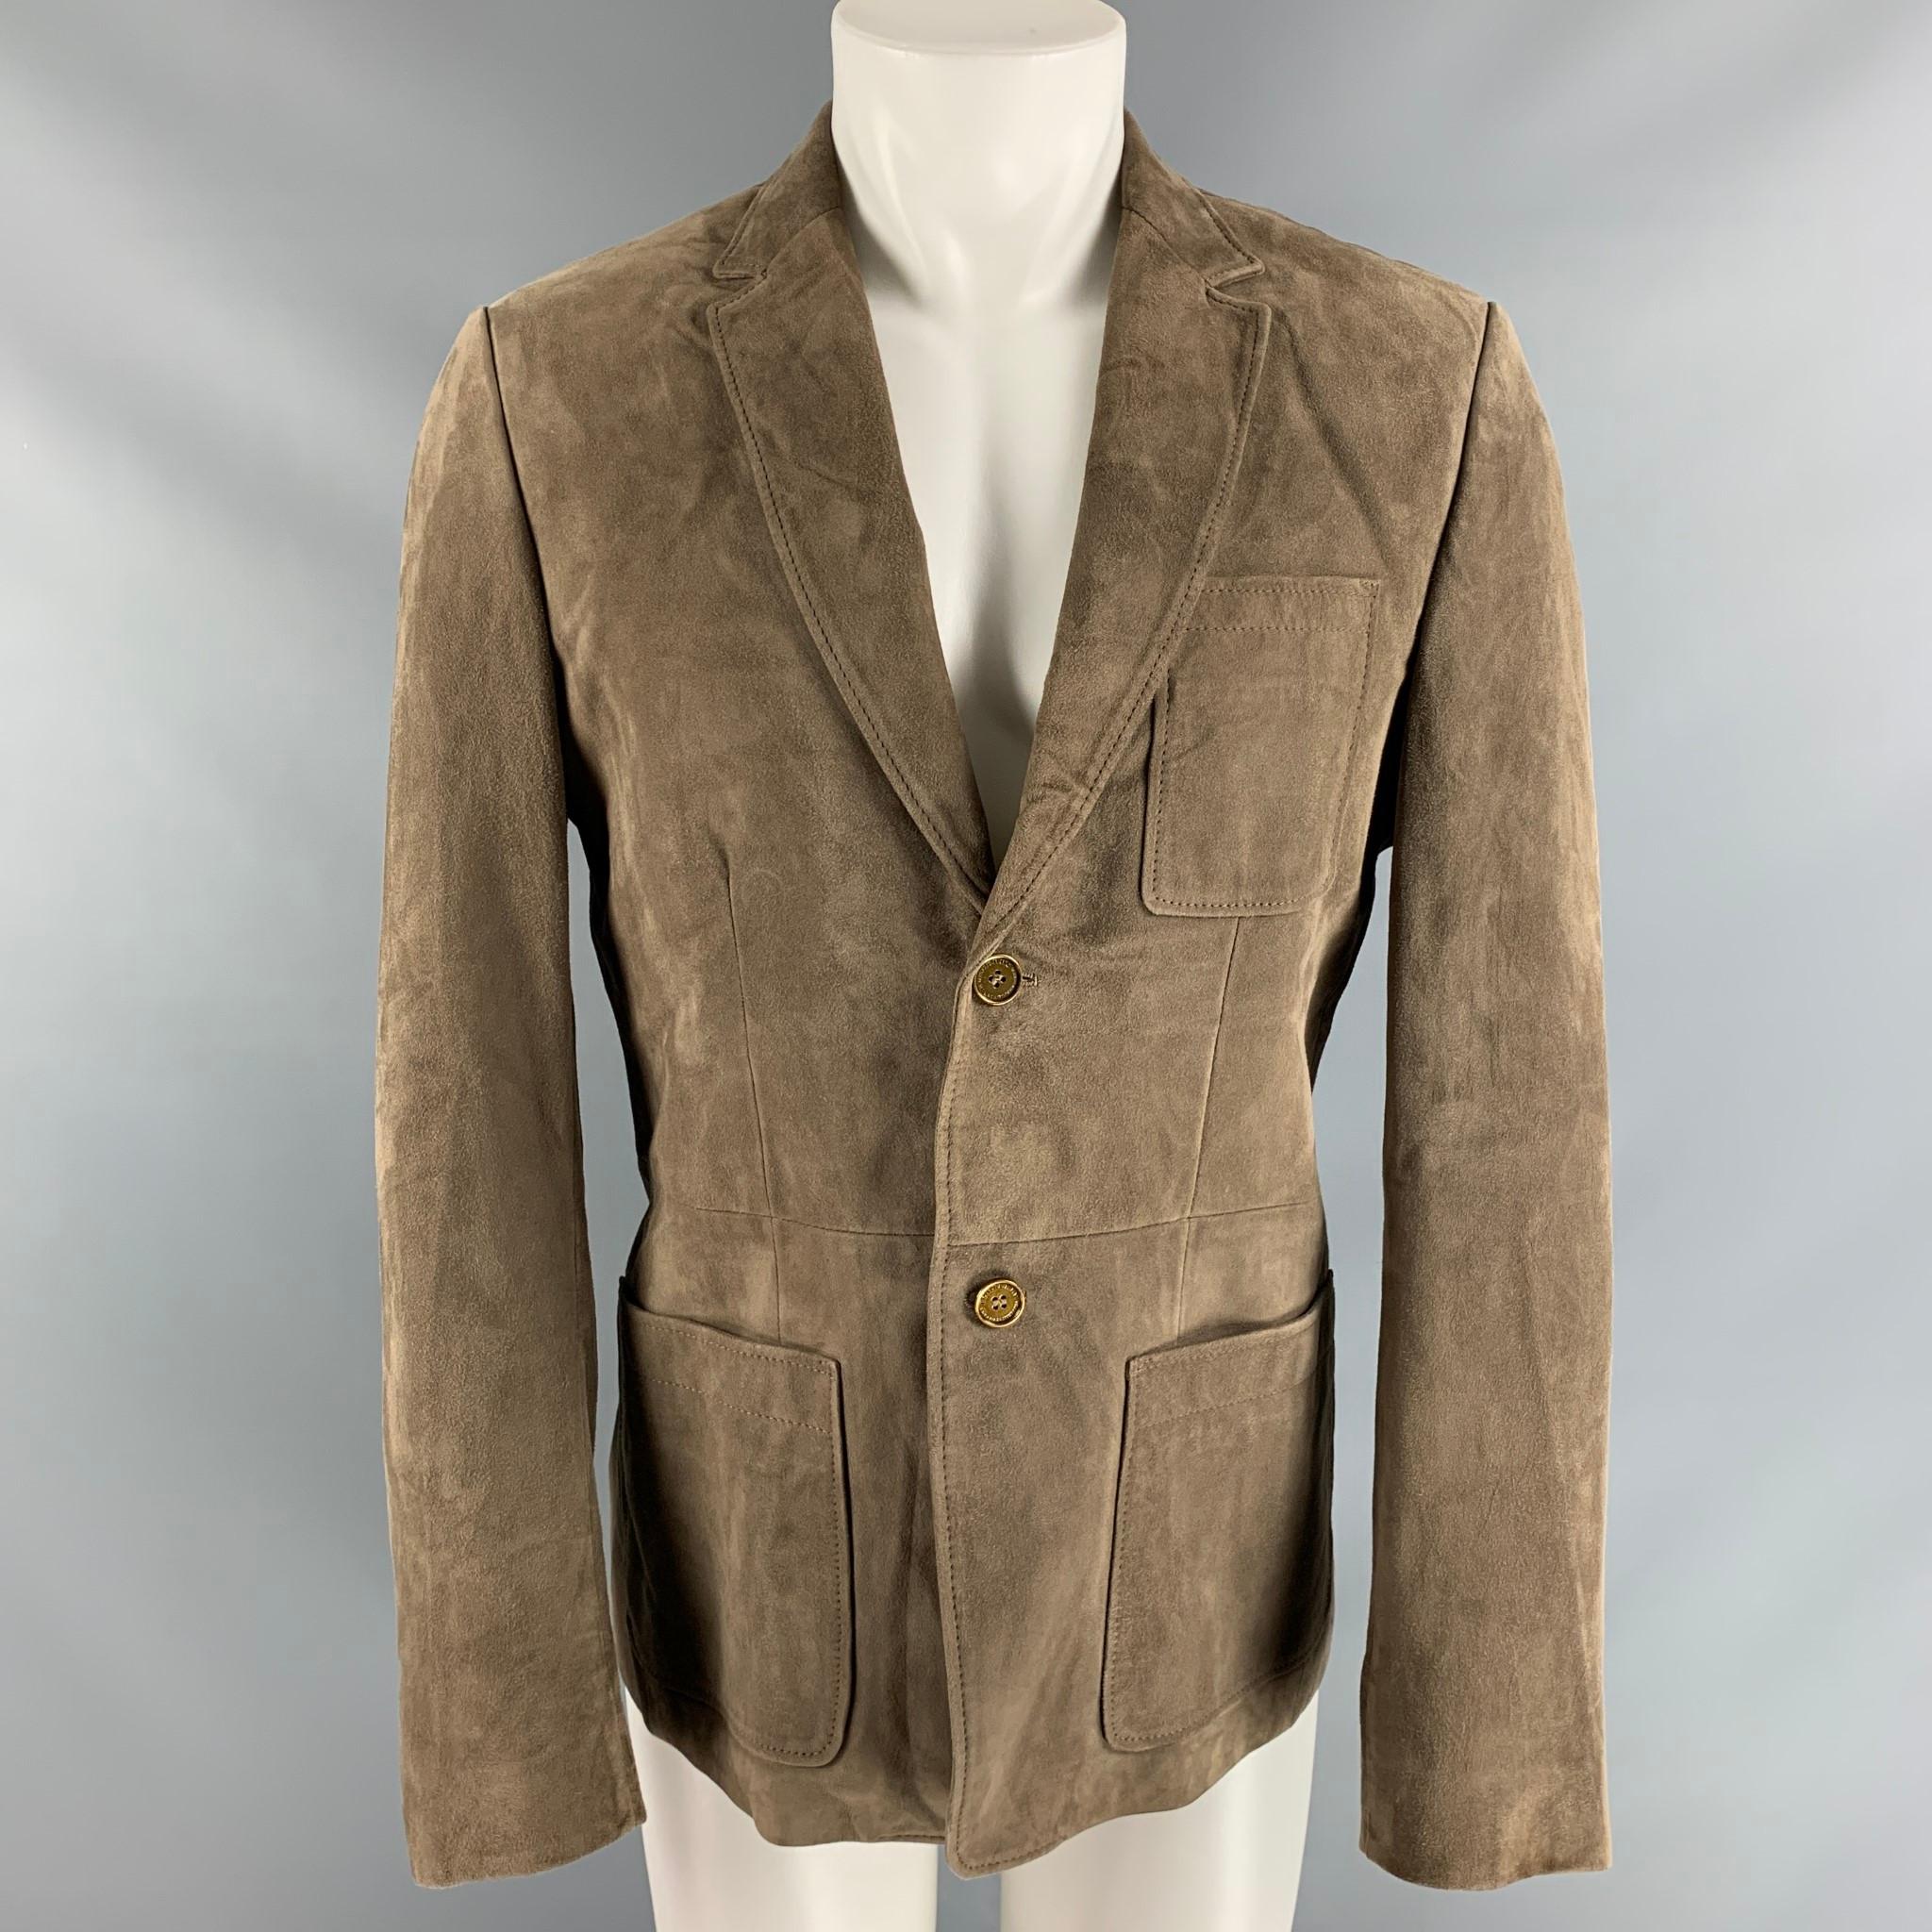 BURBERRY PRORSUM sport coat, fully lined comes in a taupe suede featuring a two button closure, three patch pockets and peak lapel. Made in Italy.

Excellent Pre-Owned Condition.
Marked: 50

Measurements:

Shoulder: 17.5 in
Chest: 42 in
Sleeve: 27